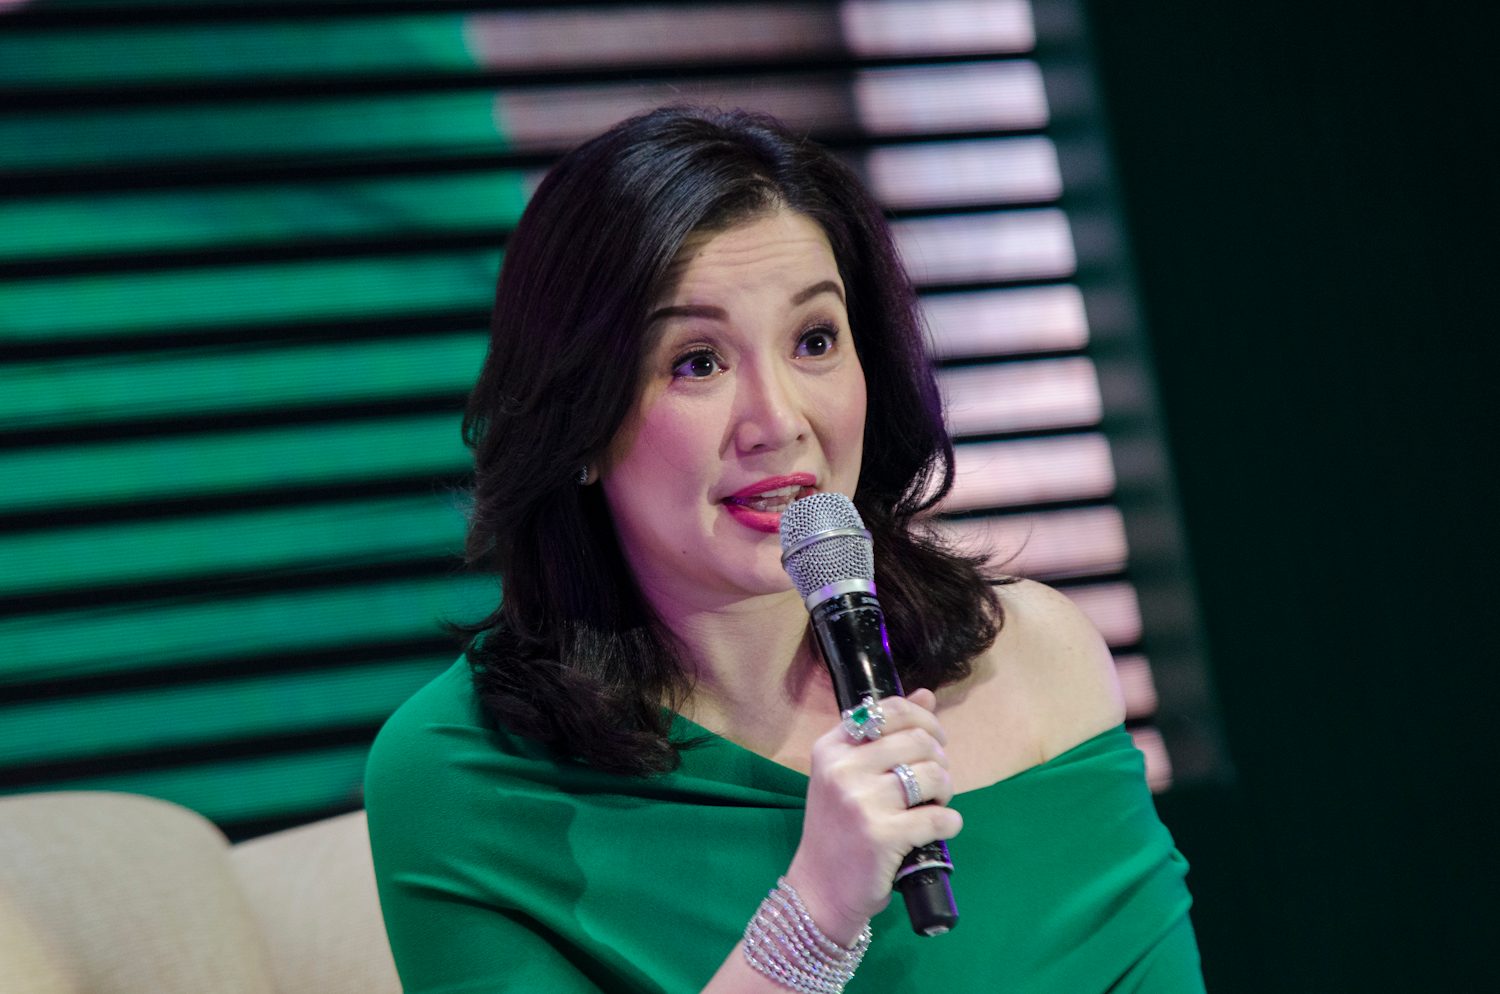 Kris Aquino on leaving ABS-CBN, future projects